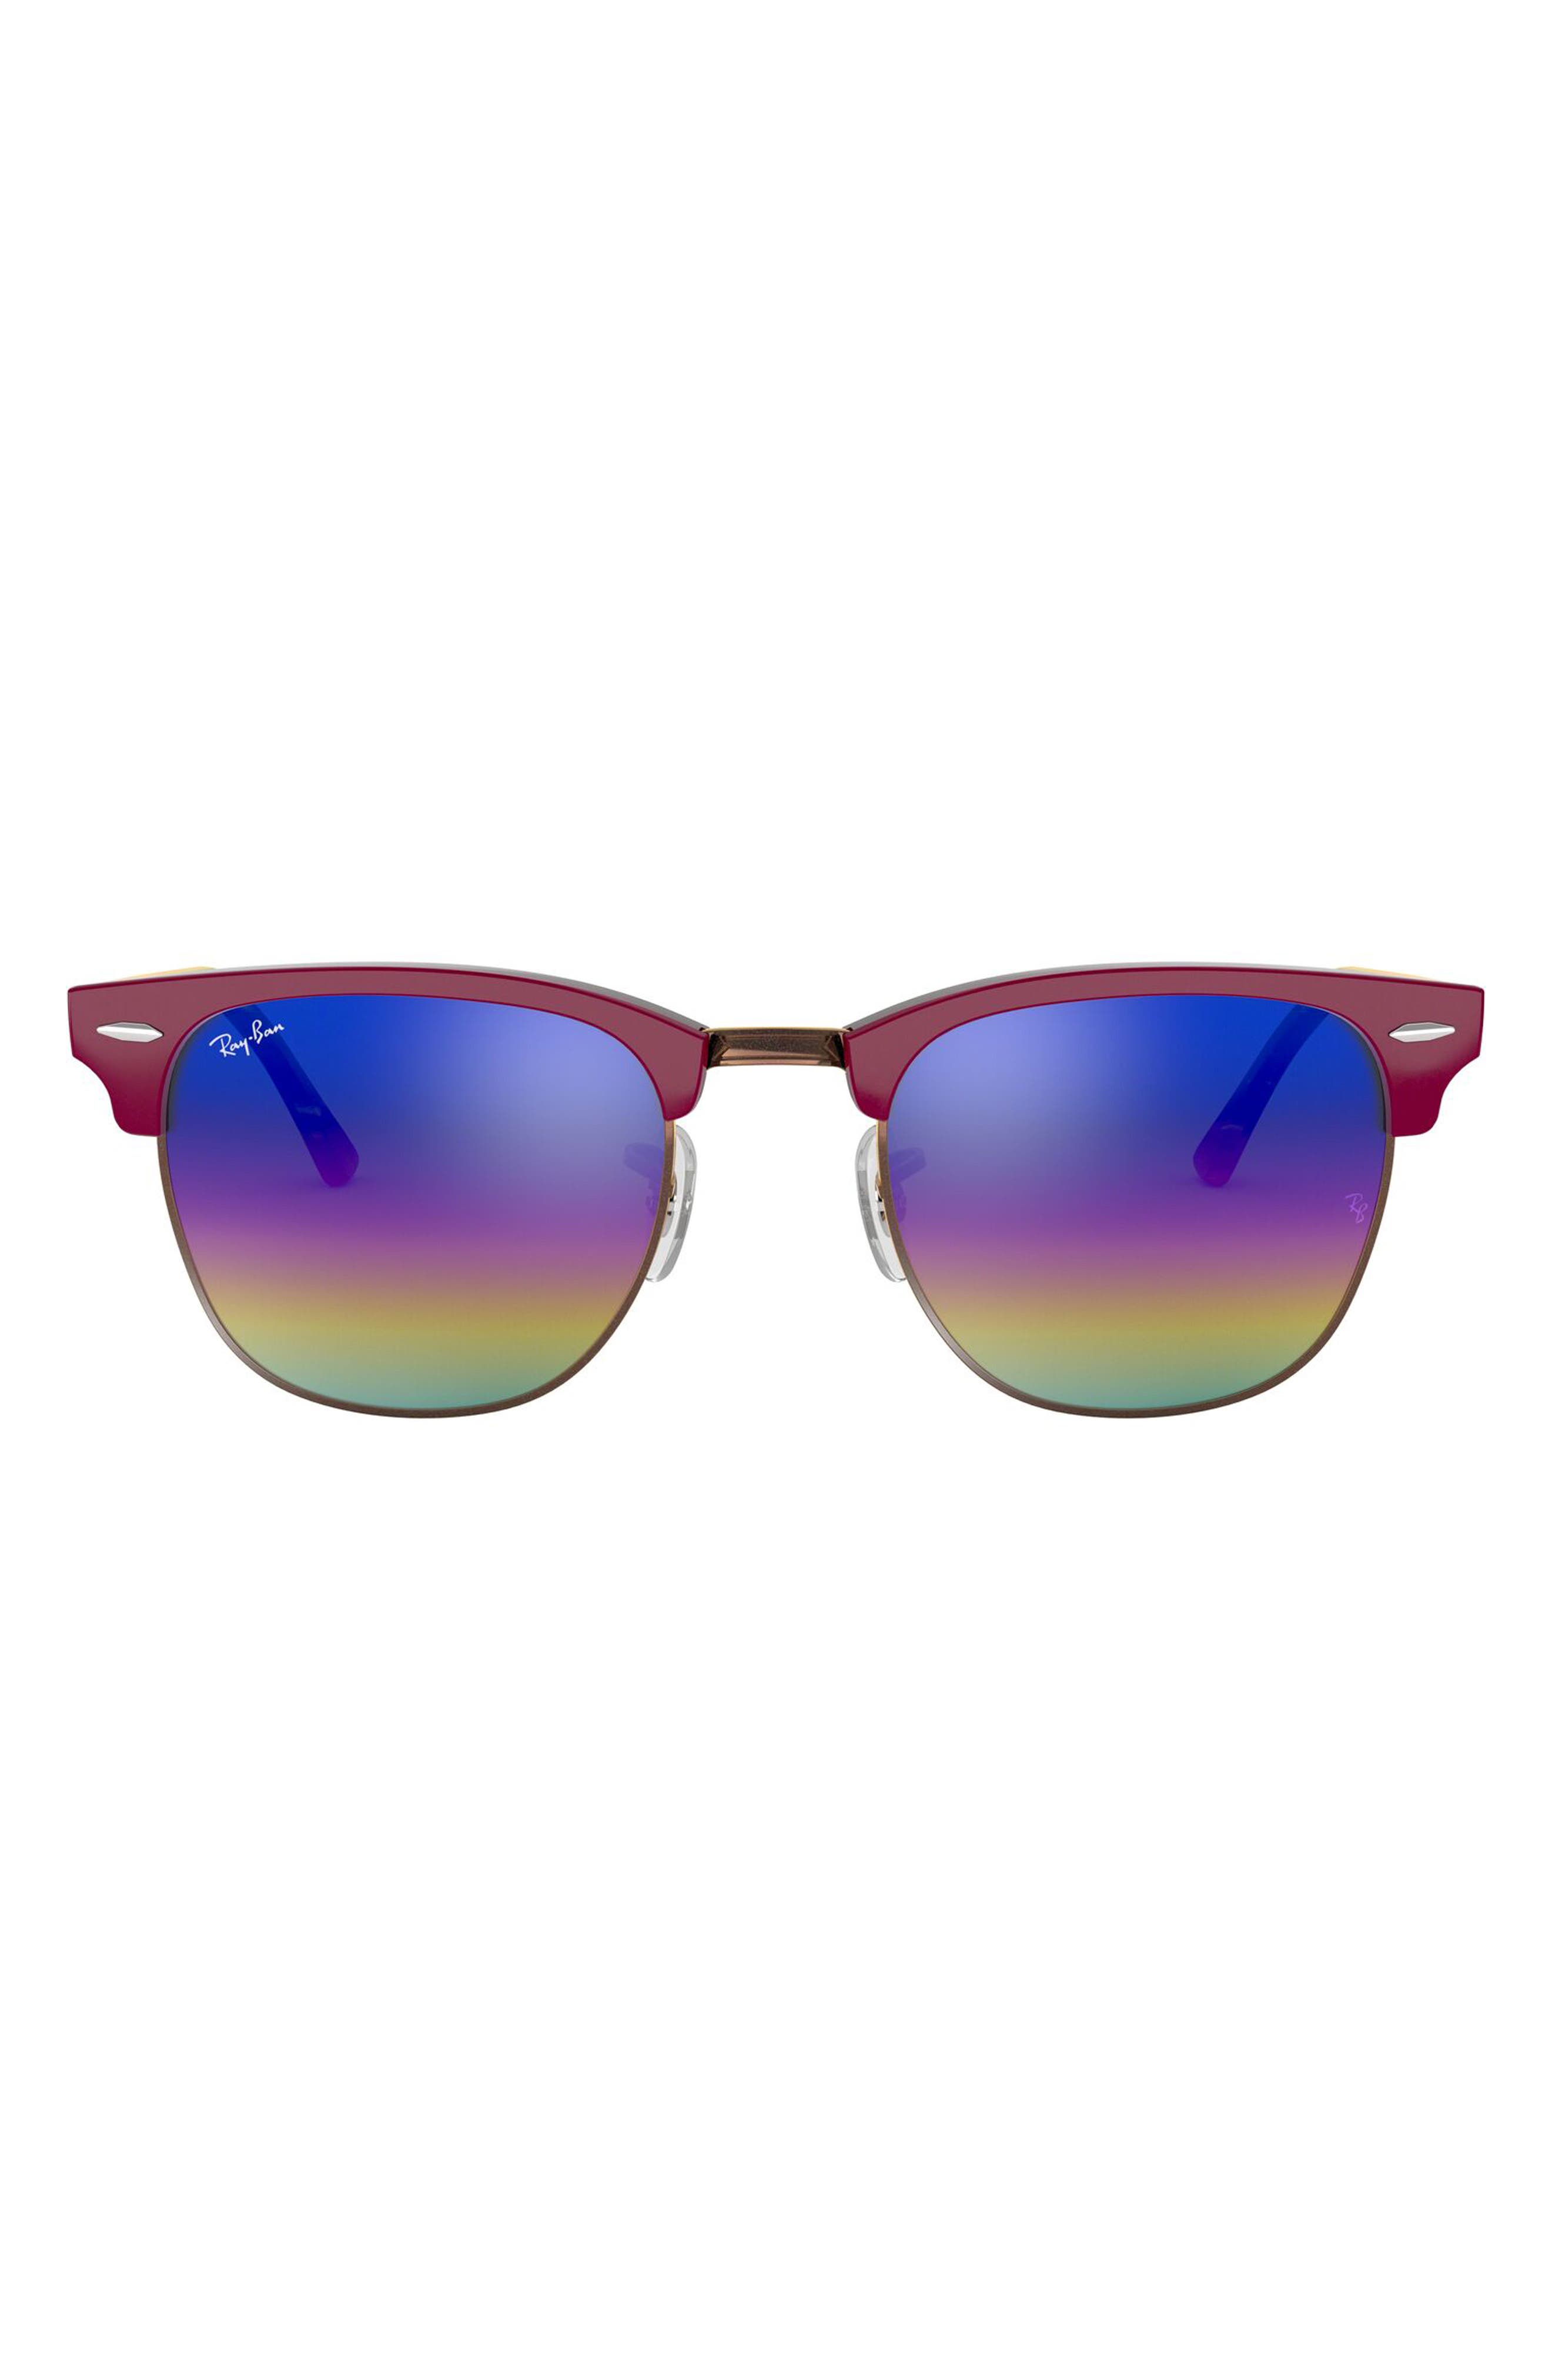 Ray Ban Clubmaster 49mm Sunglasses In Dark Red2